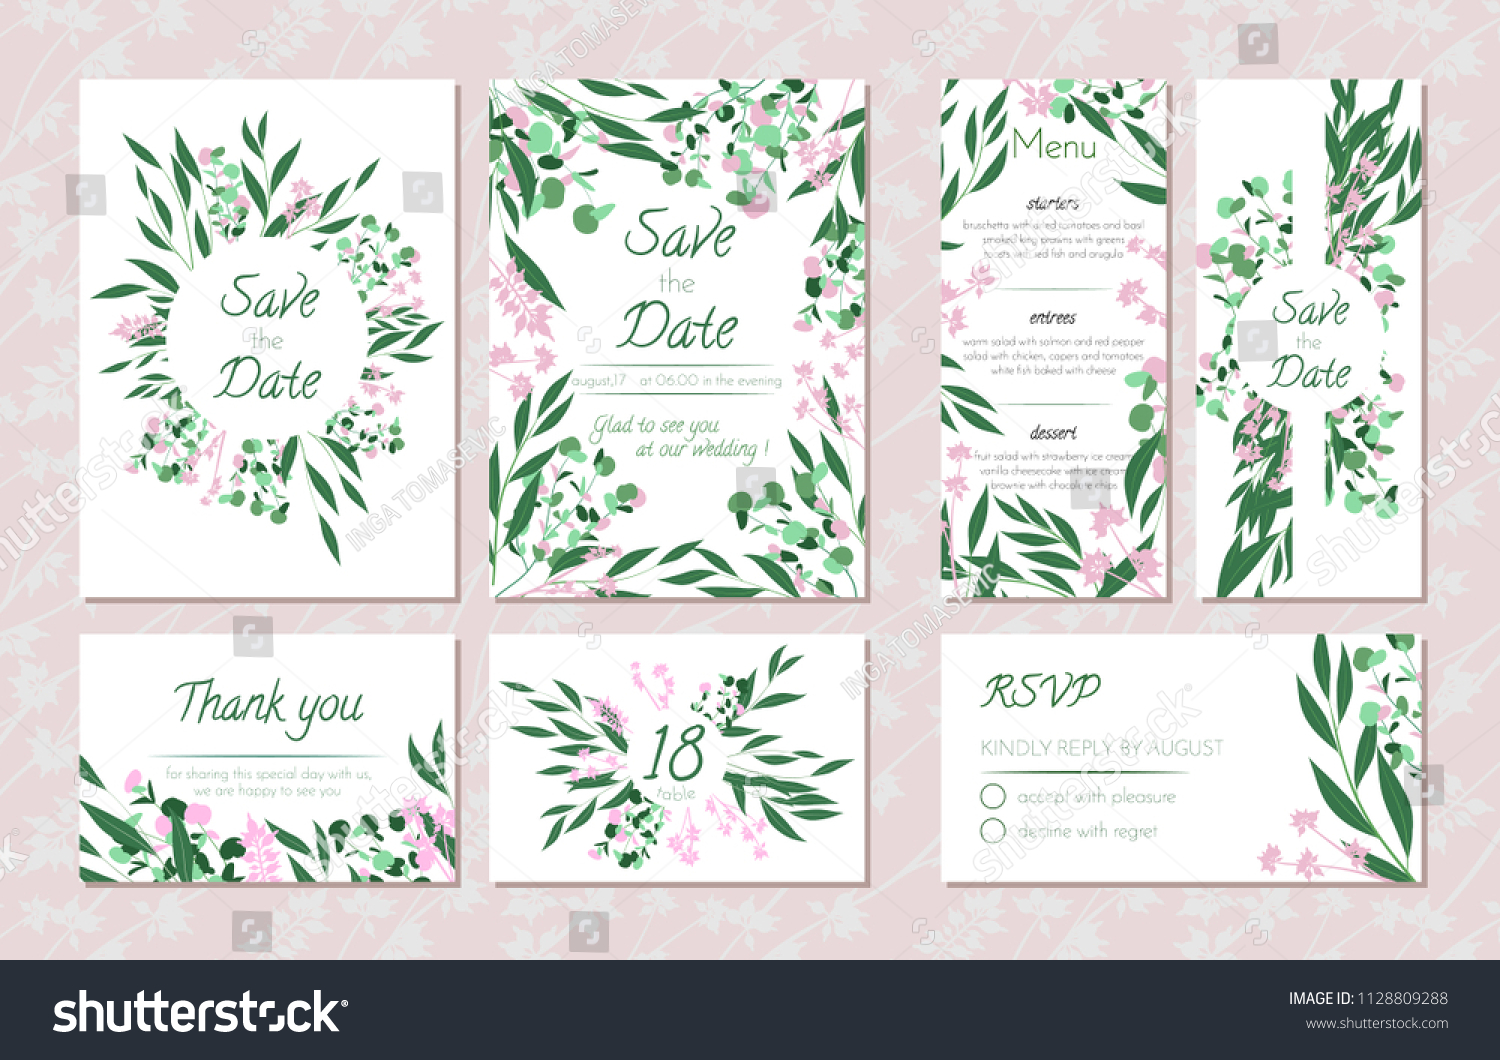 Wedding Card Templates Set with Eucalyptus. Decorative Frames with Leaves, Floral and Herbs Garland. Menu, Rsvp, Label, Invitation with Nature Wreath. Vector Hand Drawn Wedding Cards Isolated on White #1128809288